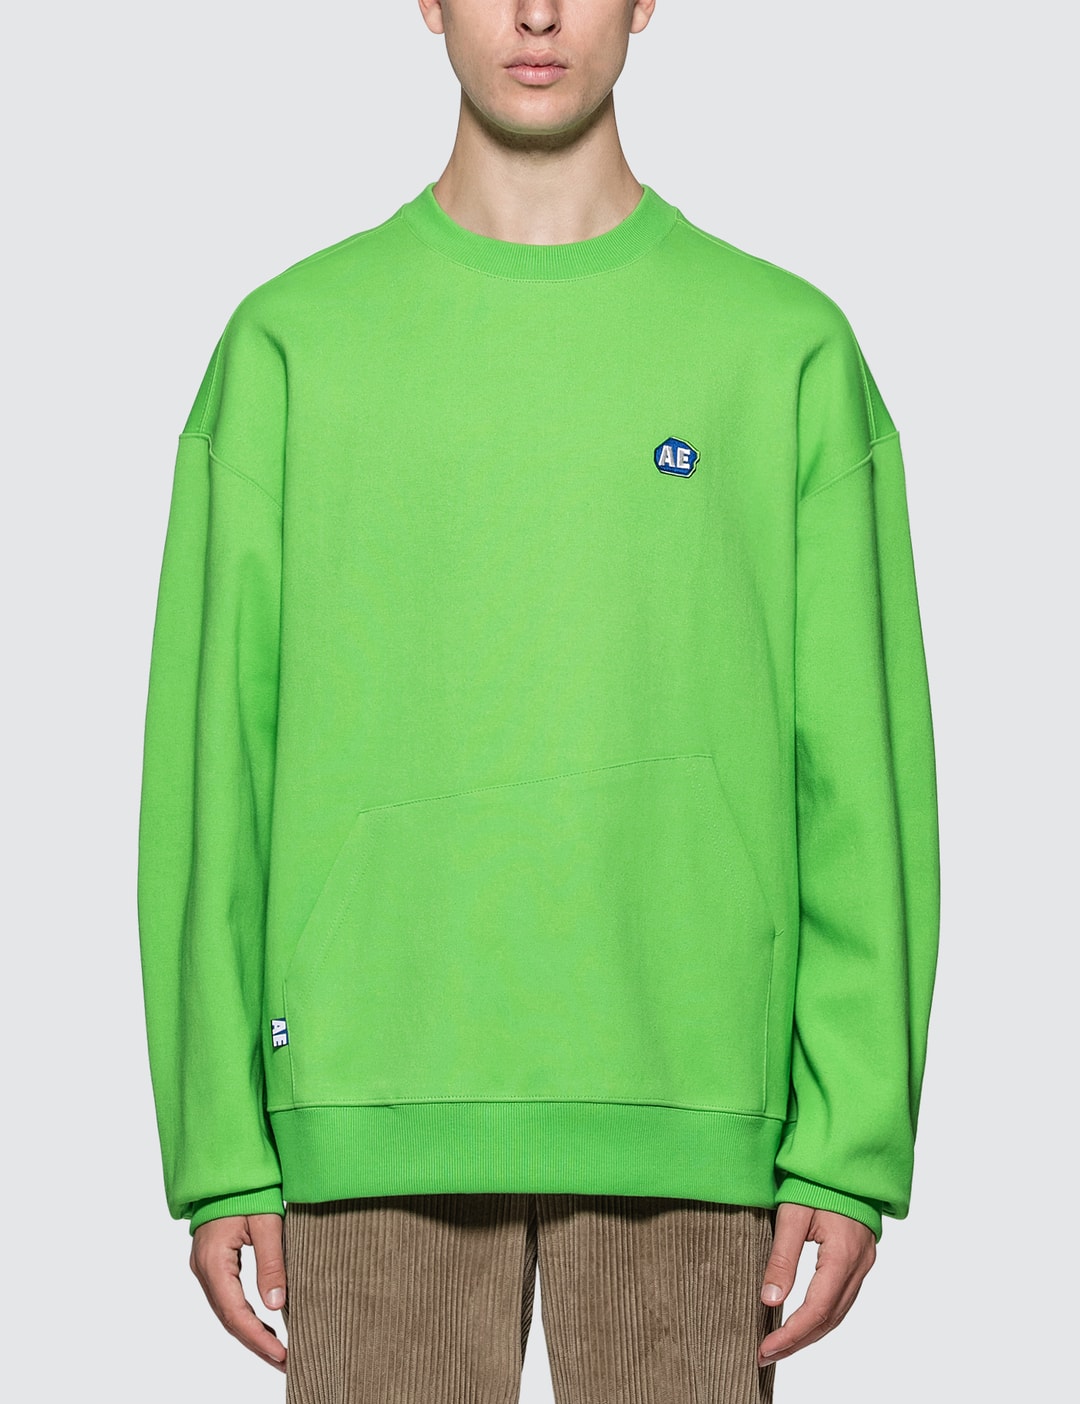 Ader Error - Embroidered Logo Sweatshirt | HBX - Globally Curated ...